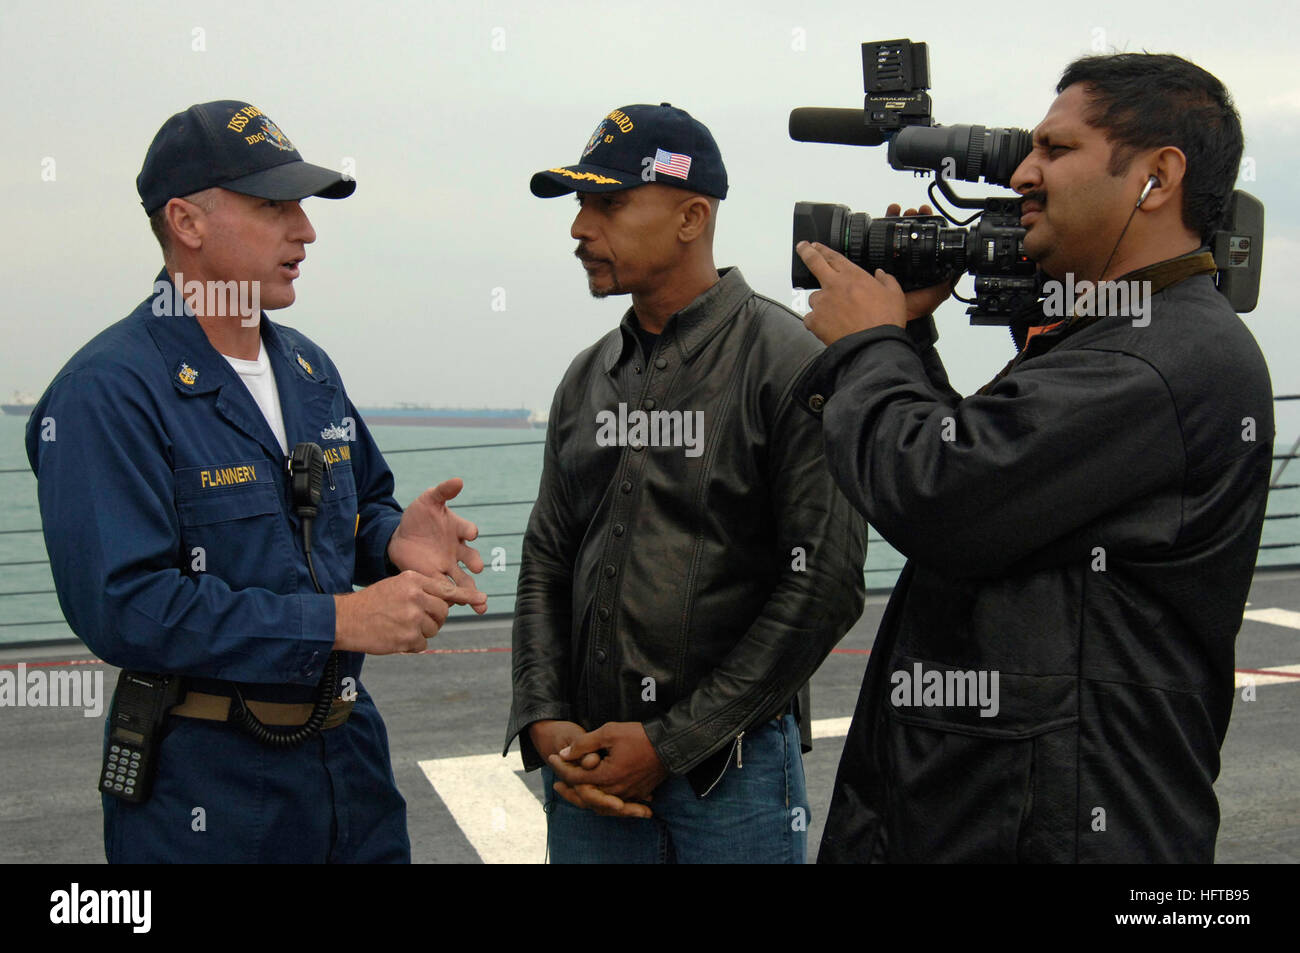 061205-N-8148A-061 Persian Gulf (Dec. 5, 2006) - Montel Williams interviews Command Master Chief David Flannerry aboard guided-missile destroyer USS Howard (DDG 83). Williams, a talk show host and a former U.S. Navy lieutenant commander, traveled to the 5th Fleet area of operations to collect footage for a holiday special dedicated to U.S. service members. U.S. Navy photo by Mass Communication Specialist 2nd Class Kitt Amaritnant (RELEASED) US Navy 061205-N-8148A-061 Montel Williams interviews Command Master Chief David Flannerry aboard guided-missile destroyer USS Howard (DDG 83) Stock Photo